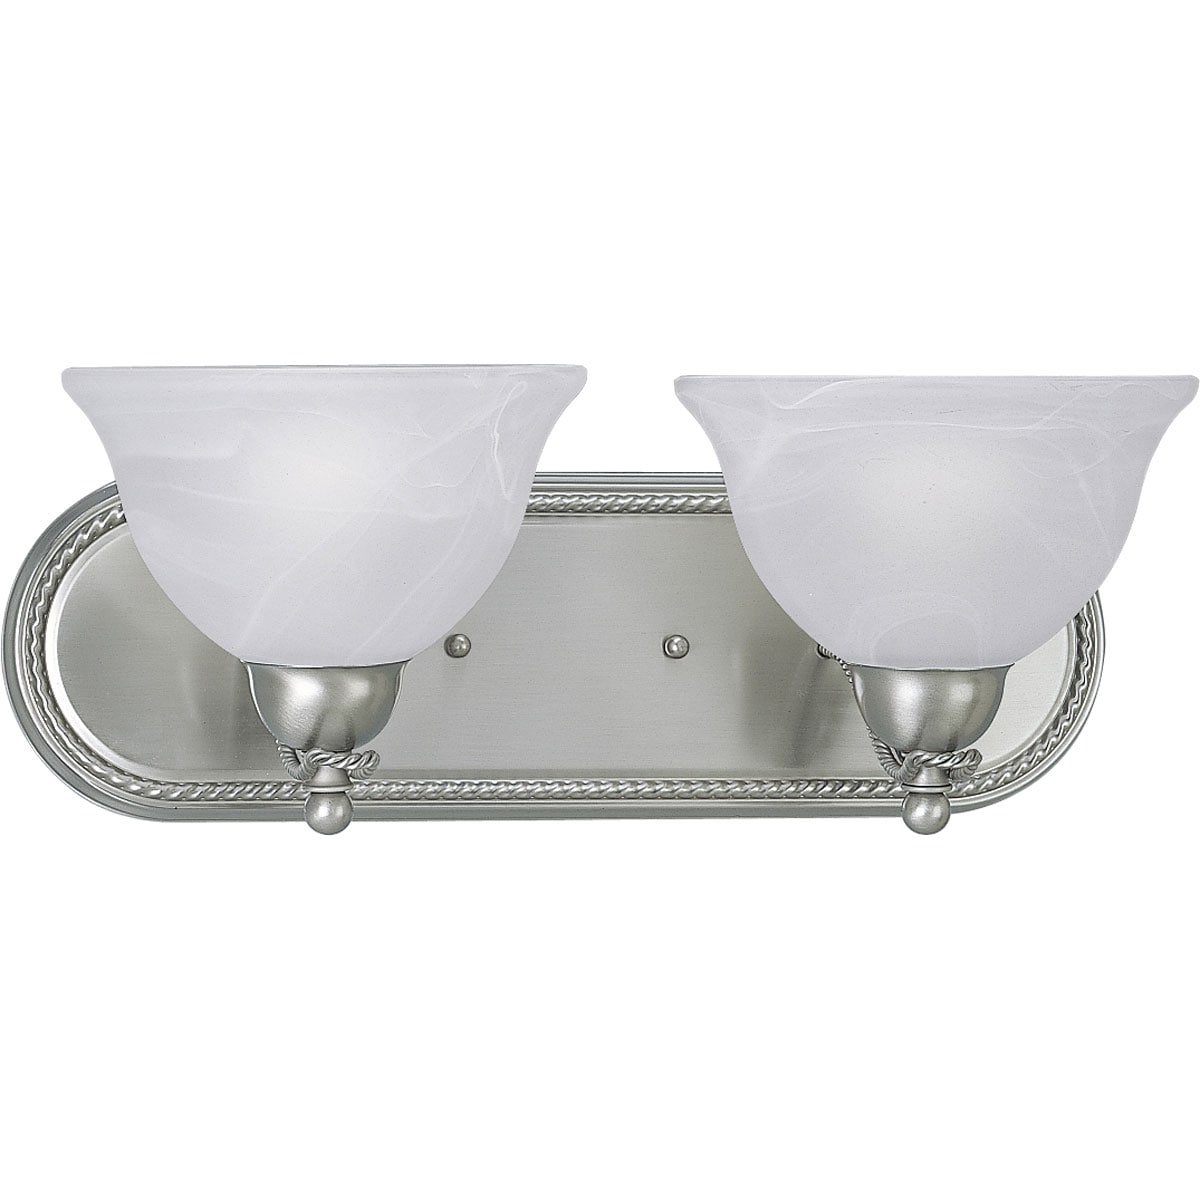 Details about   Progress Lighting Two-Light Bath Fixture with White Washed Alabaster Style Glass 